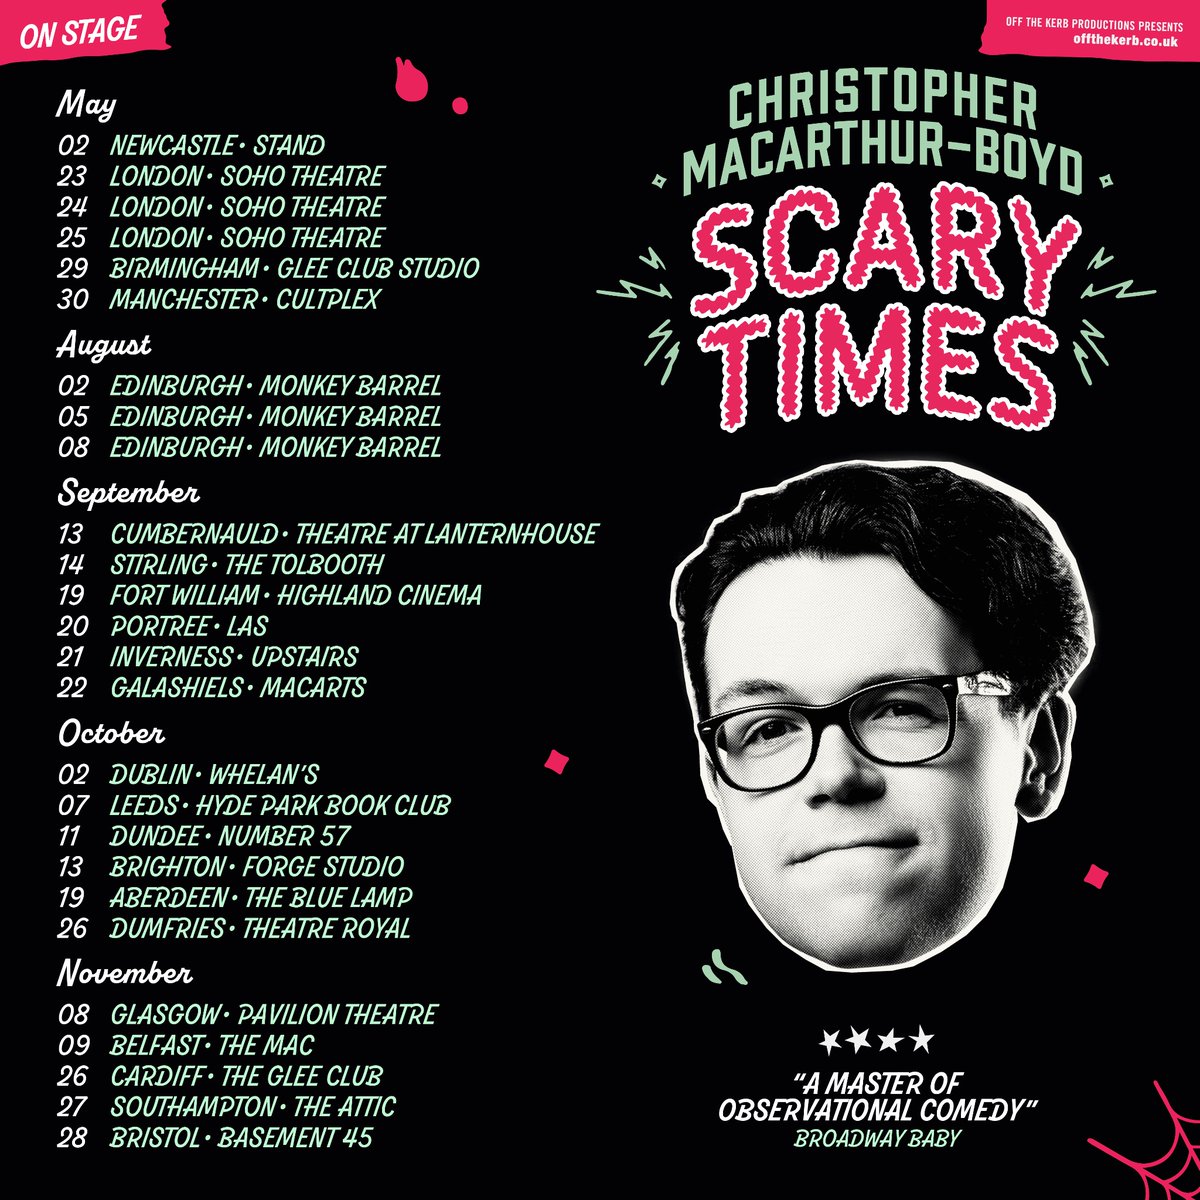 CHRISTOPHER MACARTHUR-BOYD ✨SCARY TIMES TOUR 2024 ✨ 🏴󠁧󠁢󠁳󠁣󠁴󠁿 🏴󠁧󠁢󠁥󠁮󠁧󠁿 🇮🇪 🏴󠁧󠁢󠁷󠁬󠁳󠁿 as heard on ‘here comes the guillotine’ “a master of observational comedy” “on killer form… hit after hit after hit” “speccy”